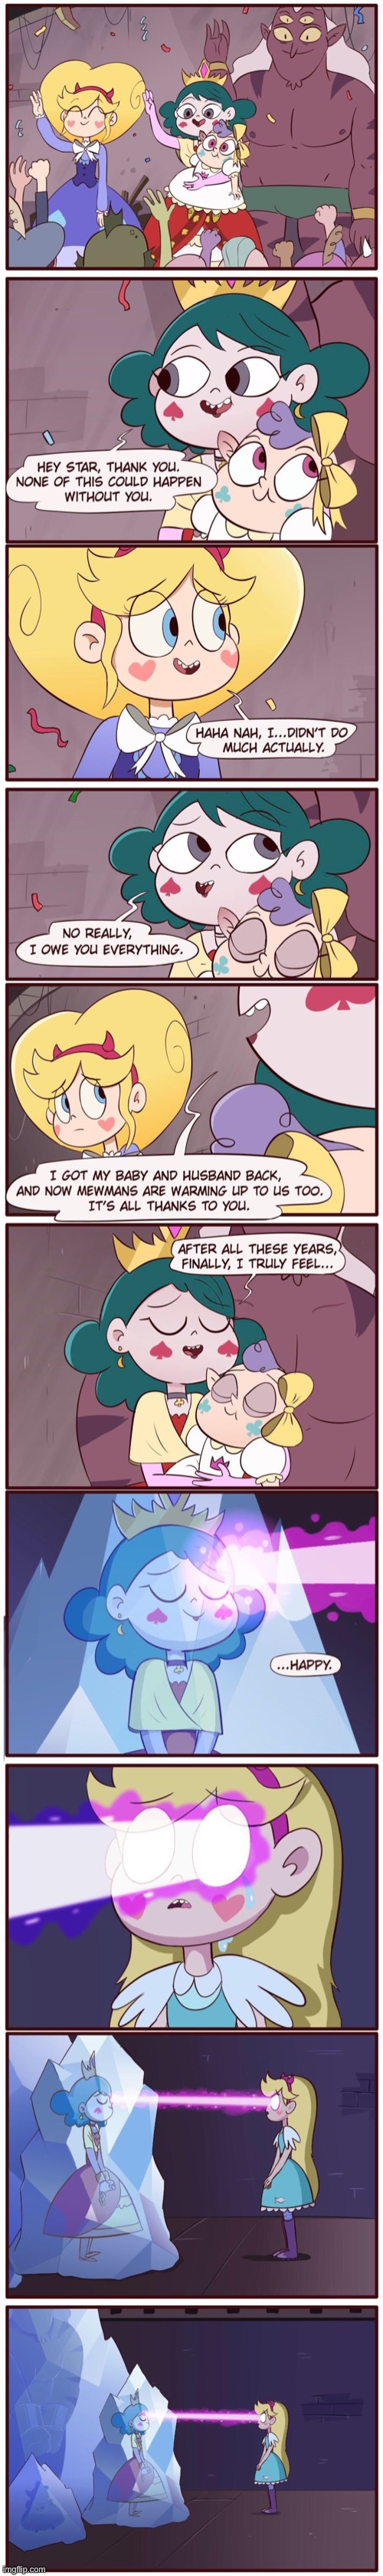 MorningMark - Thanks to them | image tagged in comics,morningmark,svtfoe,star vs the forces of evil,memes,stop reading the tags | made w/ Imgflip meme maker